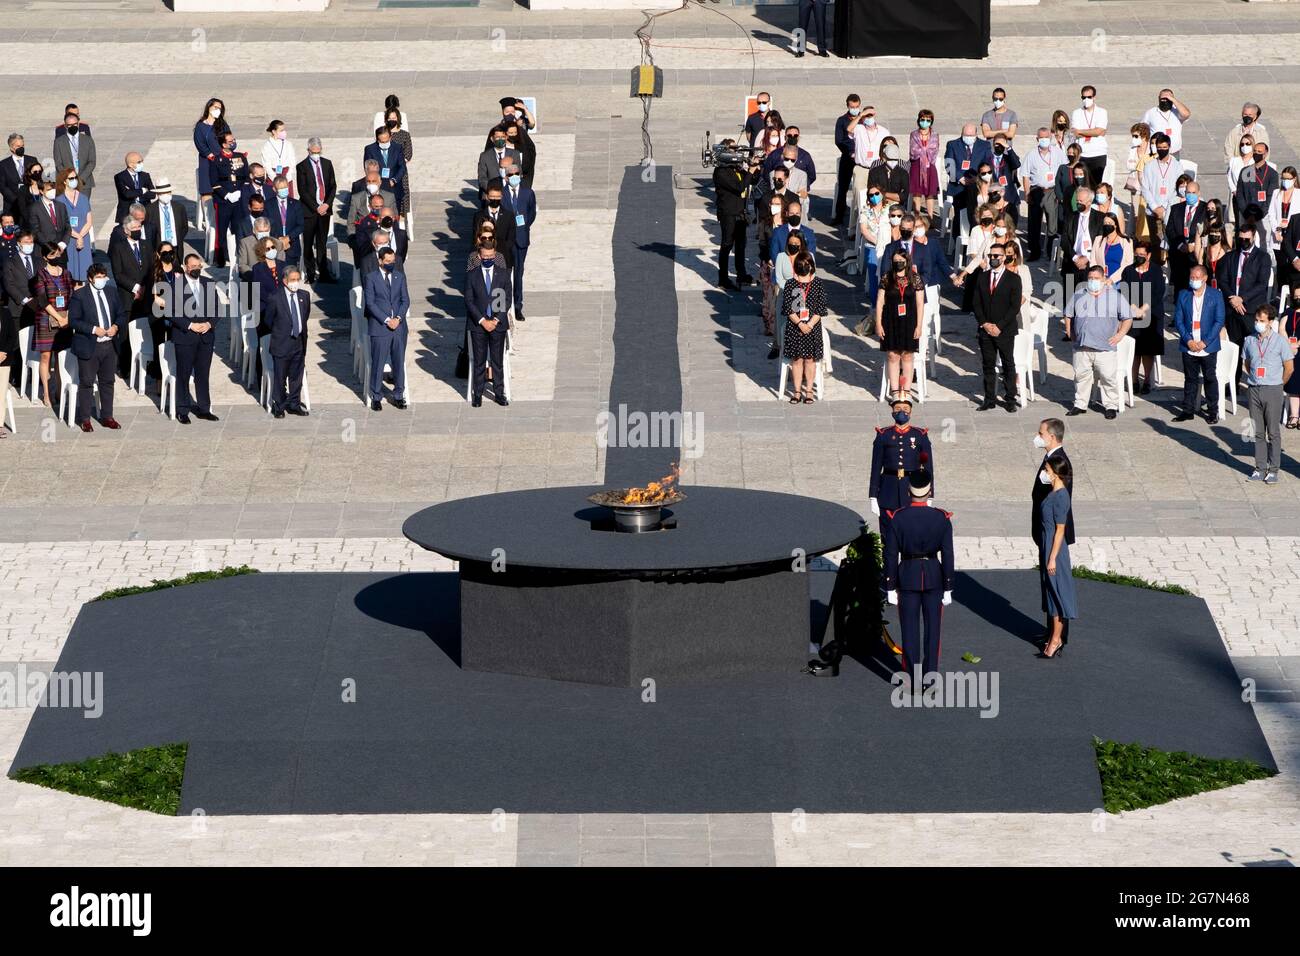 (210715) -- MADRID, July 15, 2021 (Xinhua) -- Photo taken on July 15, 2021 shows the remembrance service for coronavirus victims at the Royal Palace in Madrid, Spain. Spain held a remembrance service here at the Royal Palace on Thursday morning for the 81,043 people who have lost their lives to the coronavirus.    The family members of 102 health workers who lost their lives to COVID-19 in Spain also attended the service, where they received medals to recognize the sacrifice of their relatives during the pandemic. (Xinhua/Meng Dingbo) Stock Photo